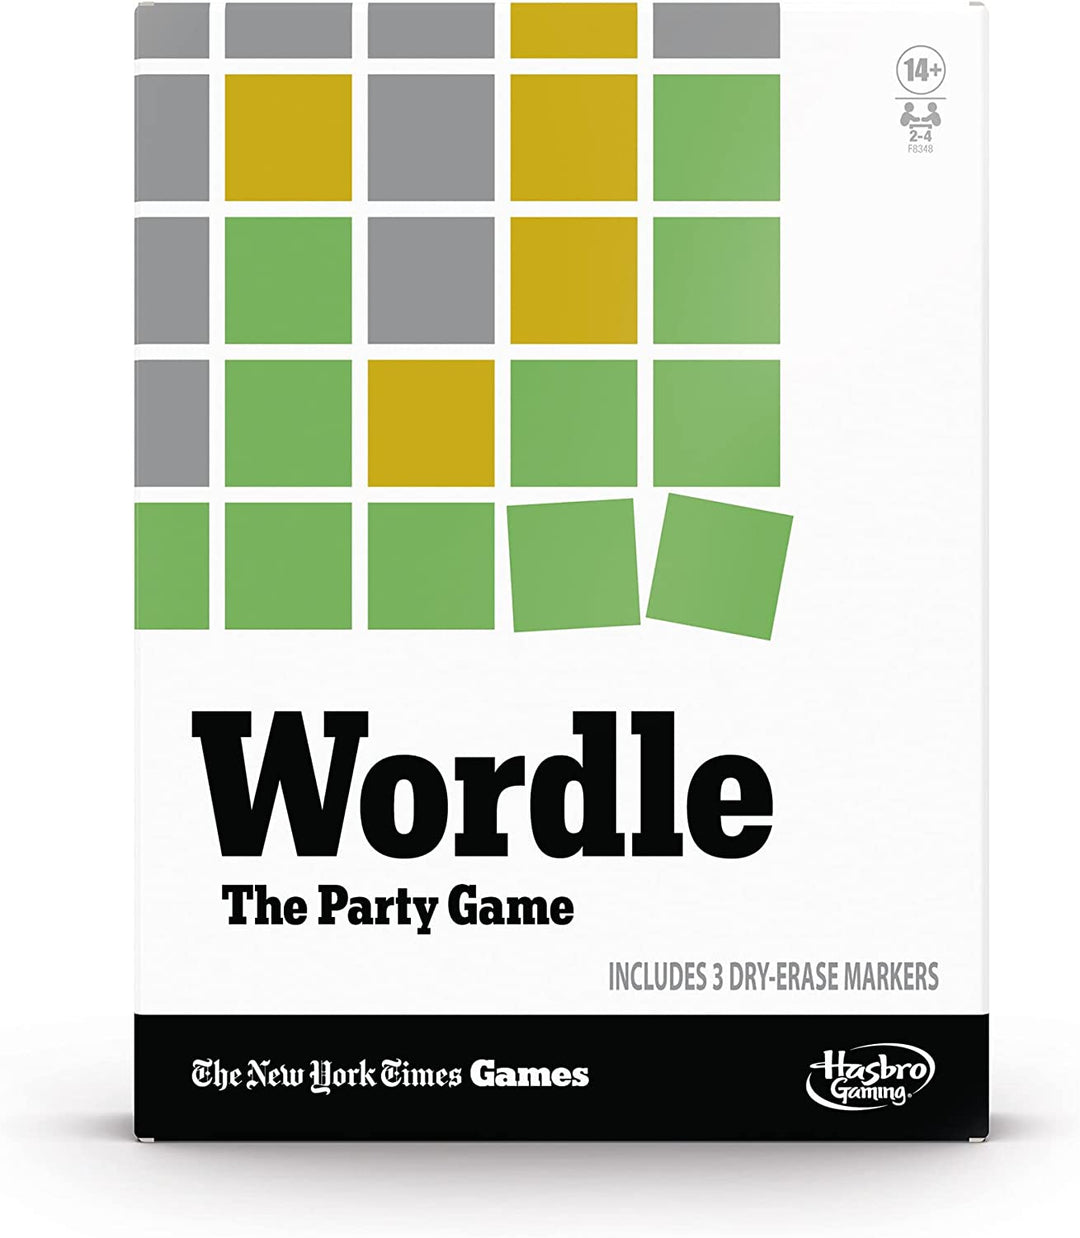 Wordle: The Party Game